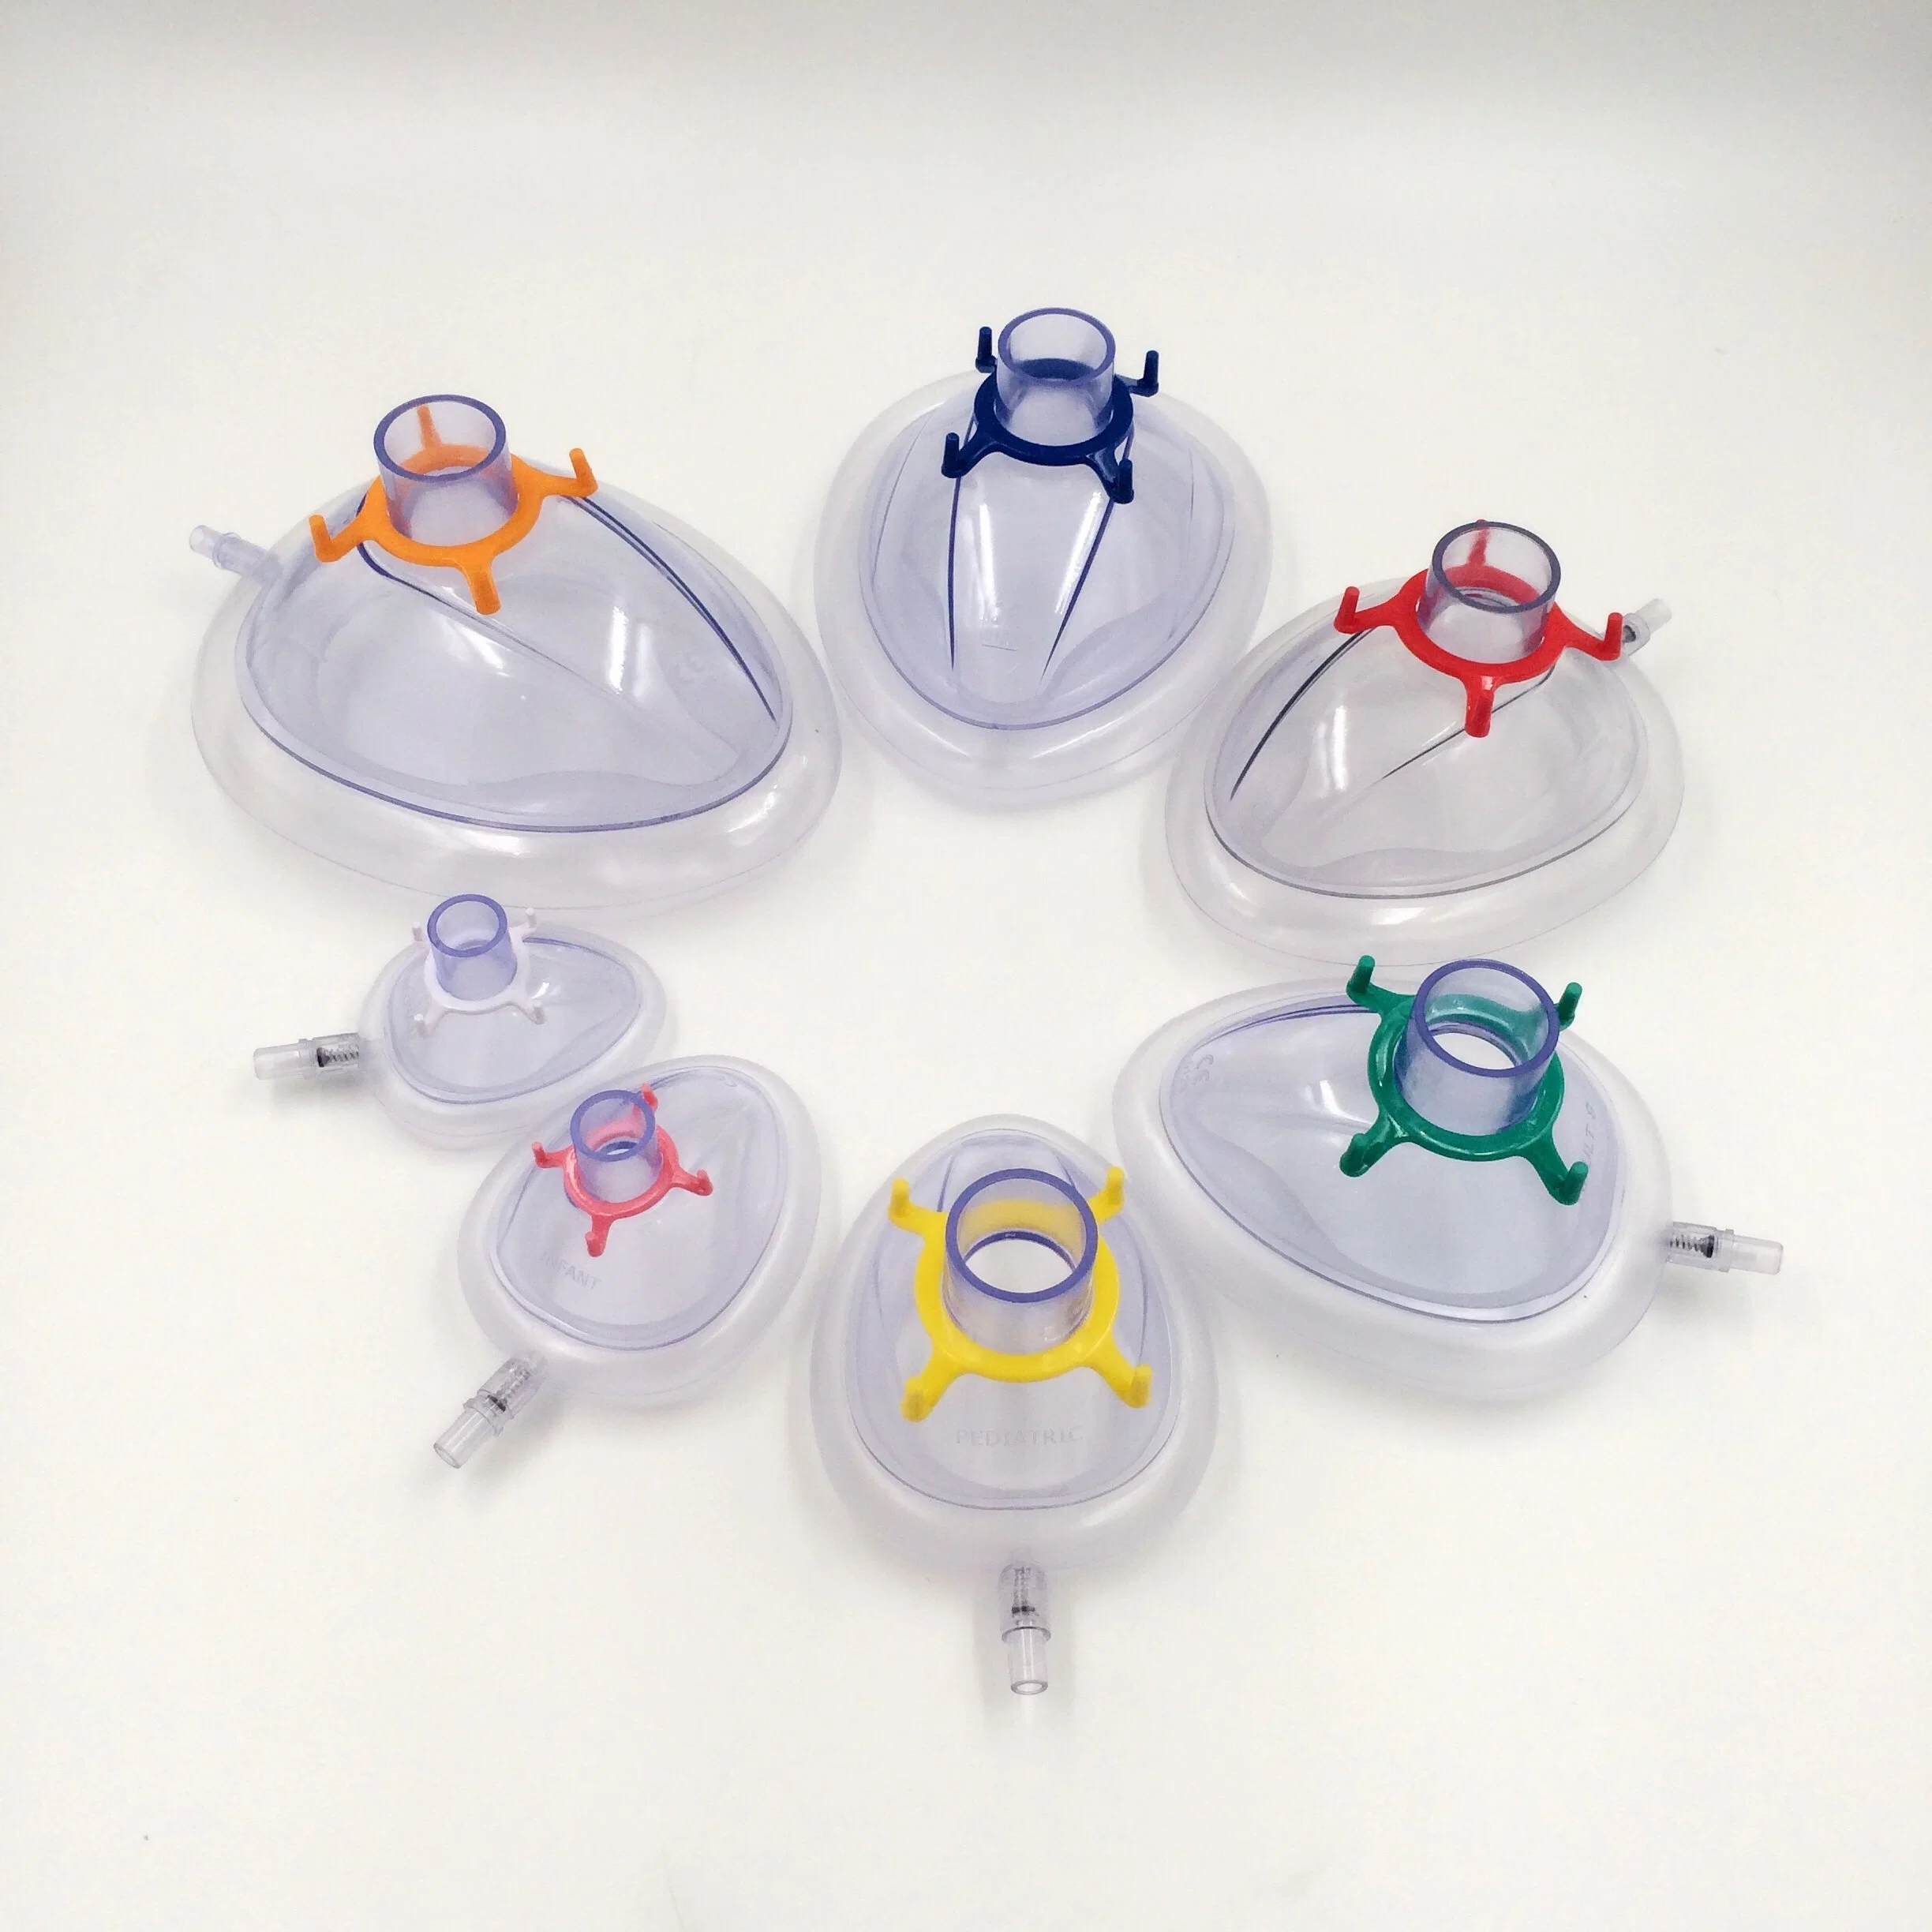 Wholesale Medical Use Disposable Anesthesia Resuscitator and Other Applications Involving Oxygen Treatment PVC Anesthesia Mask